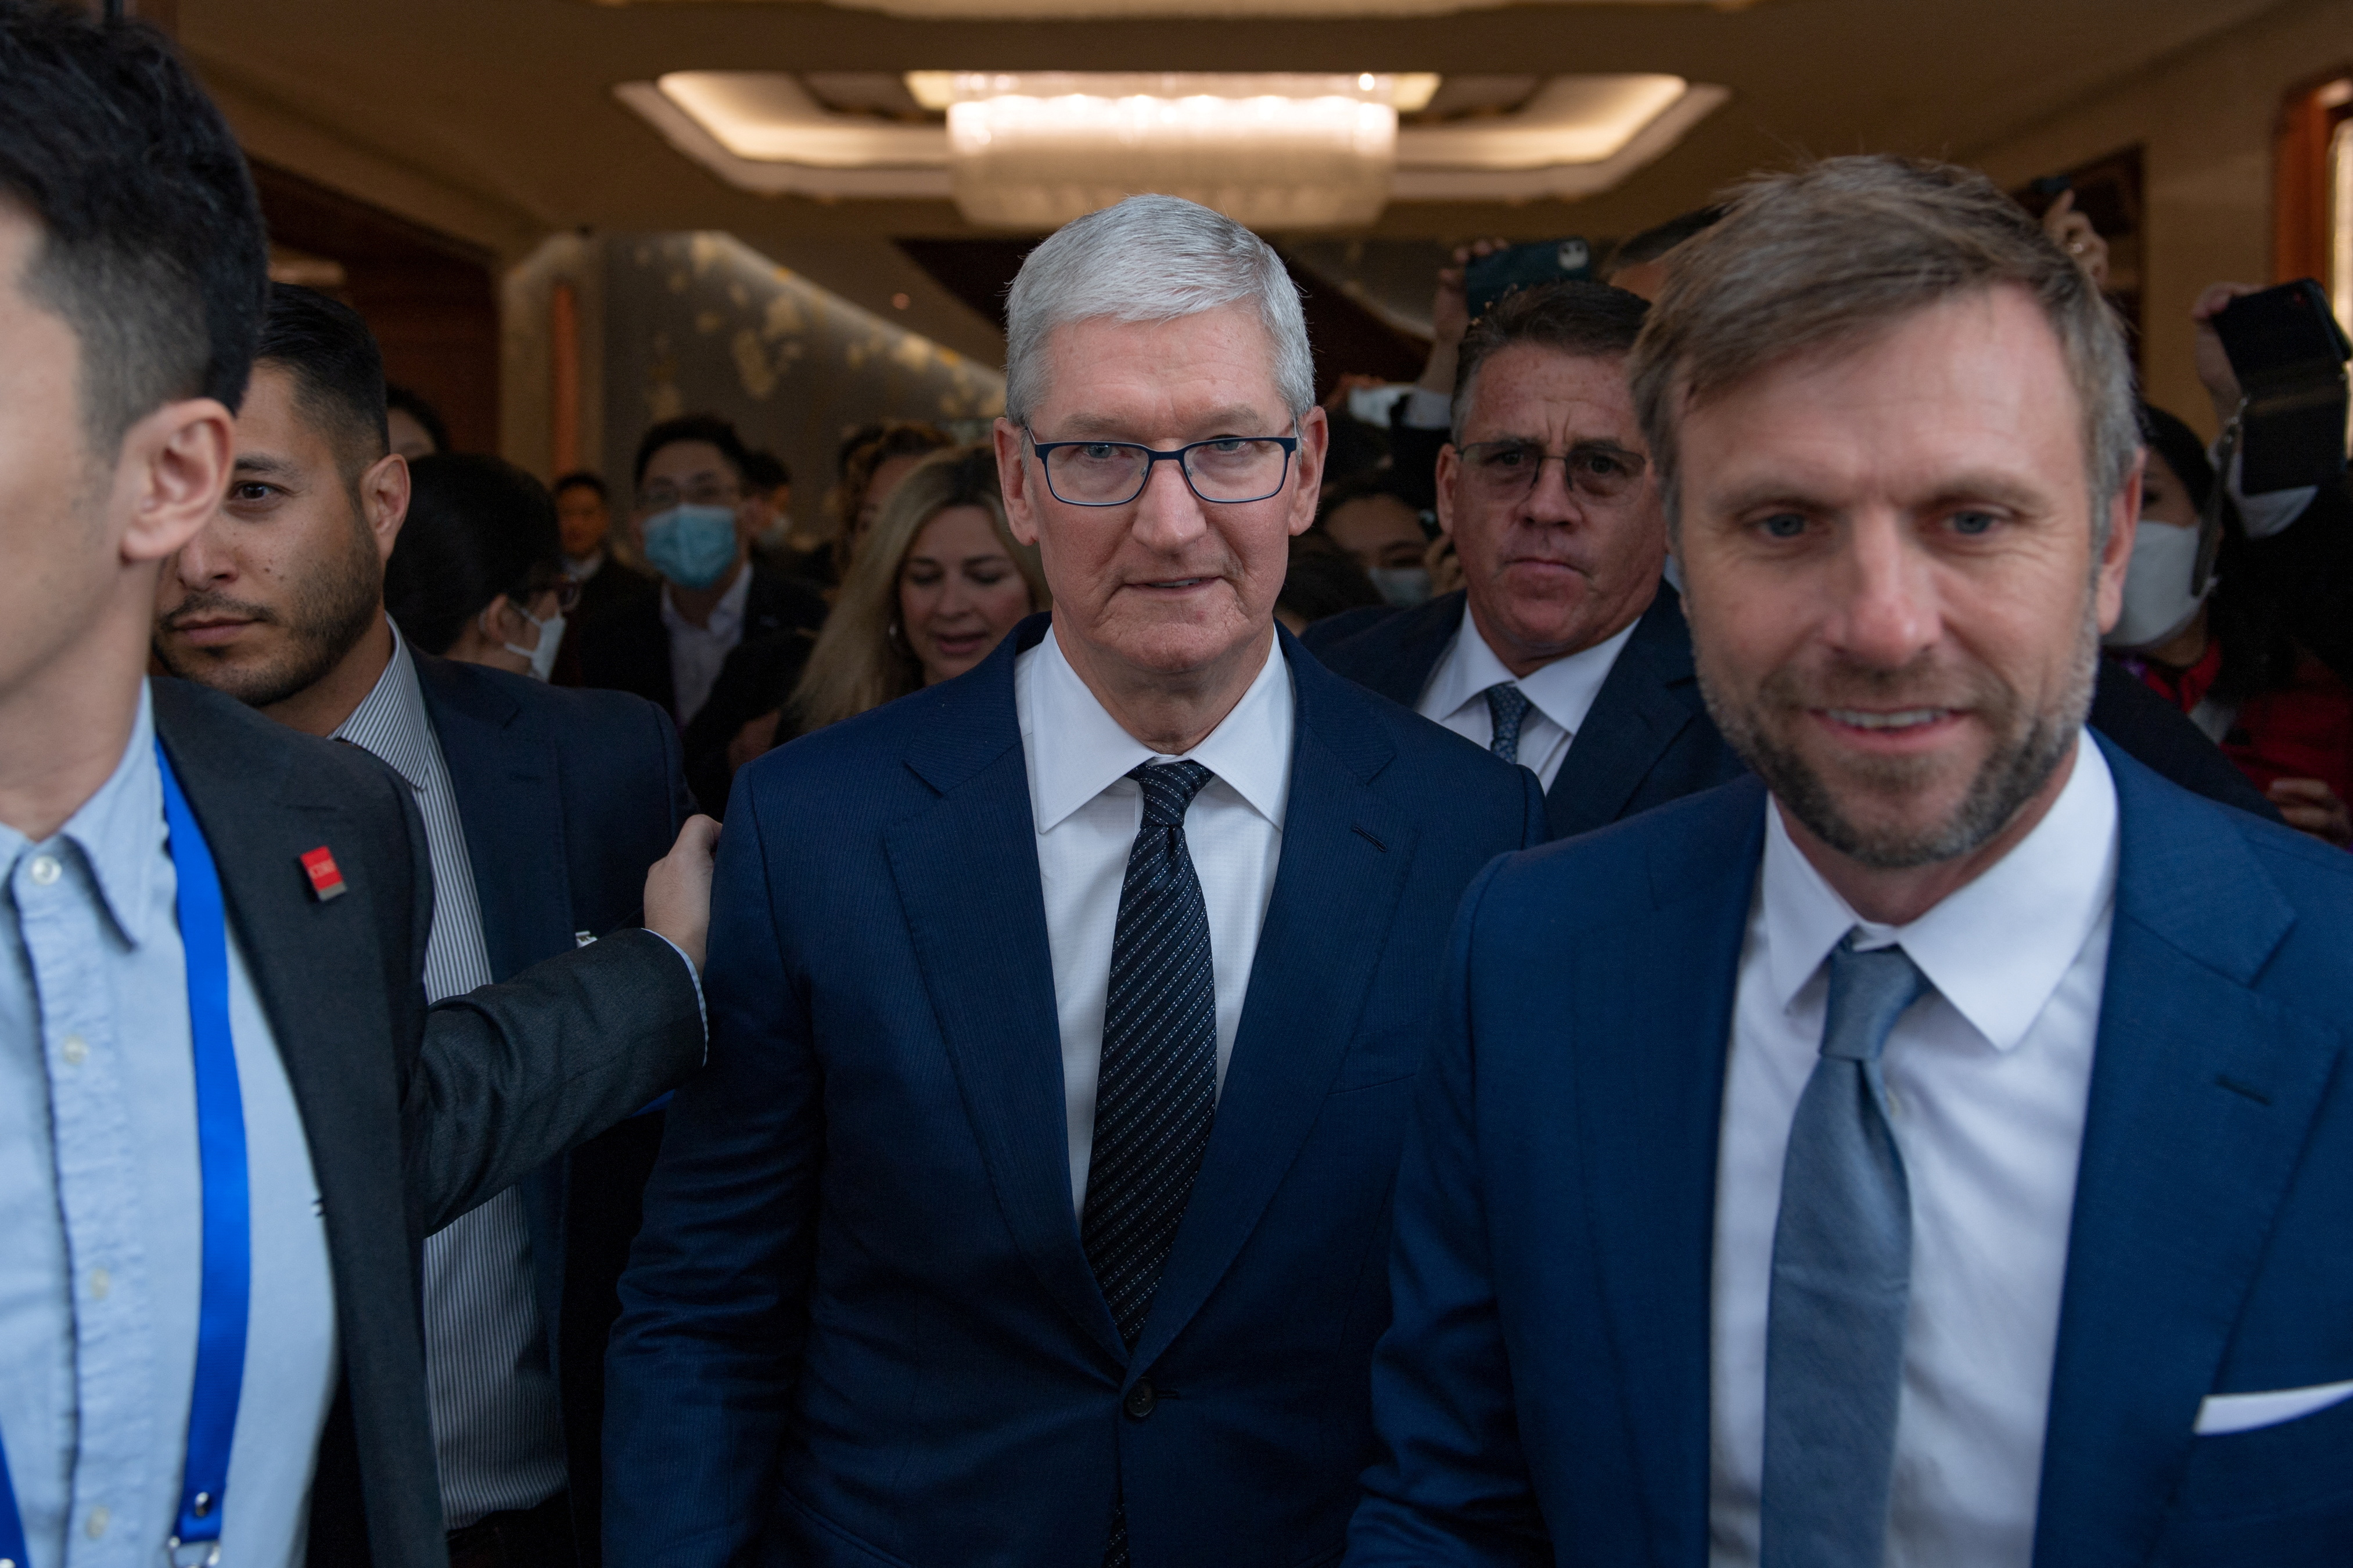 Apple's CEO Tim Cook leaves the venue following his speech at the China Development Forum 2023, in Beijing